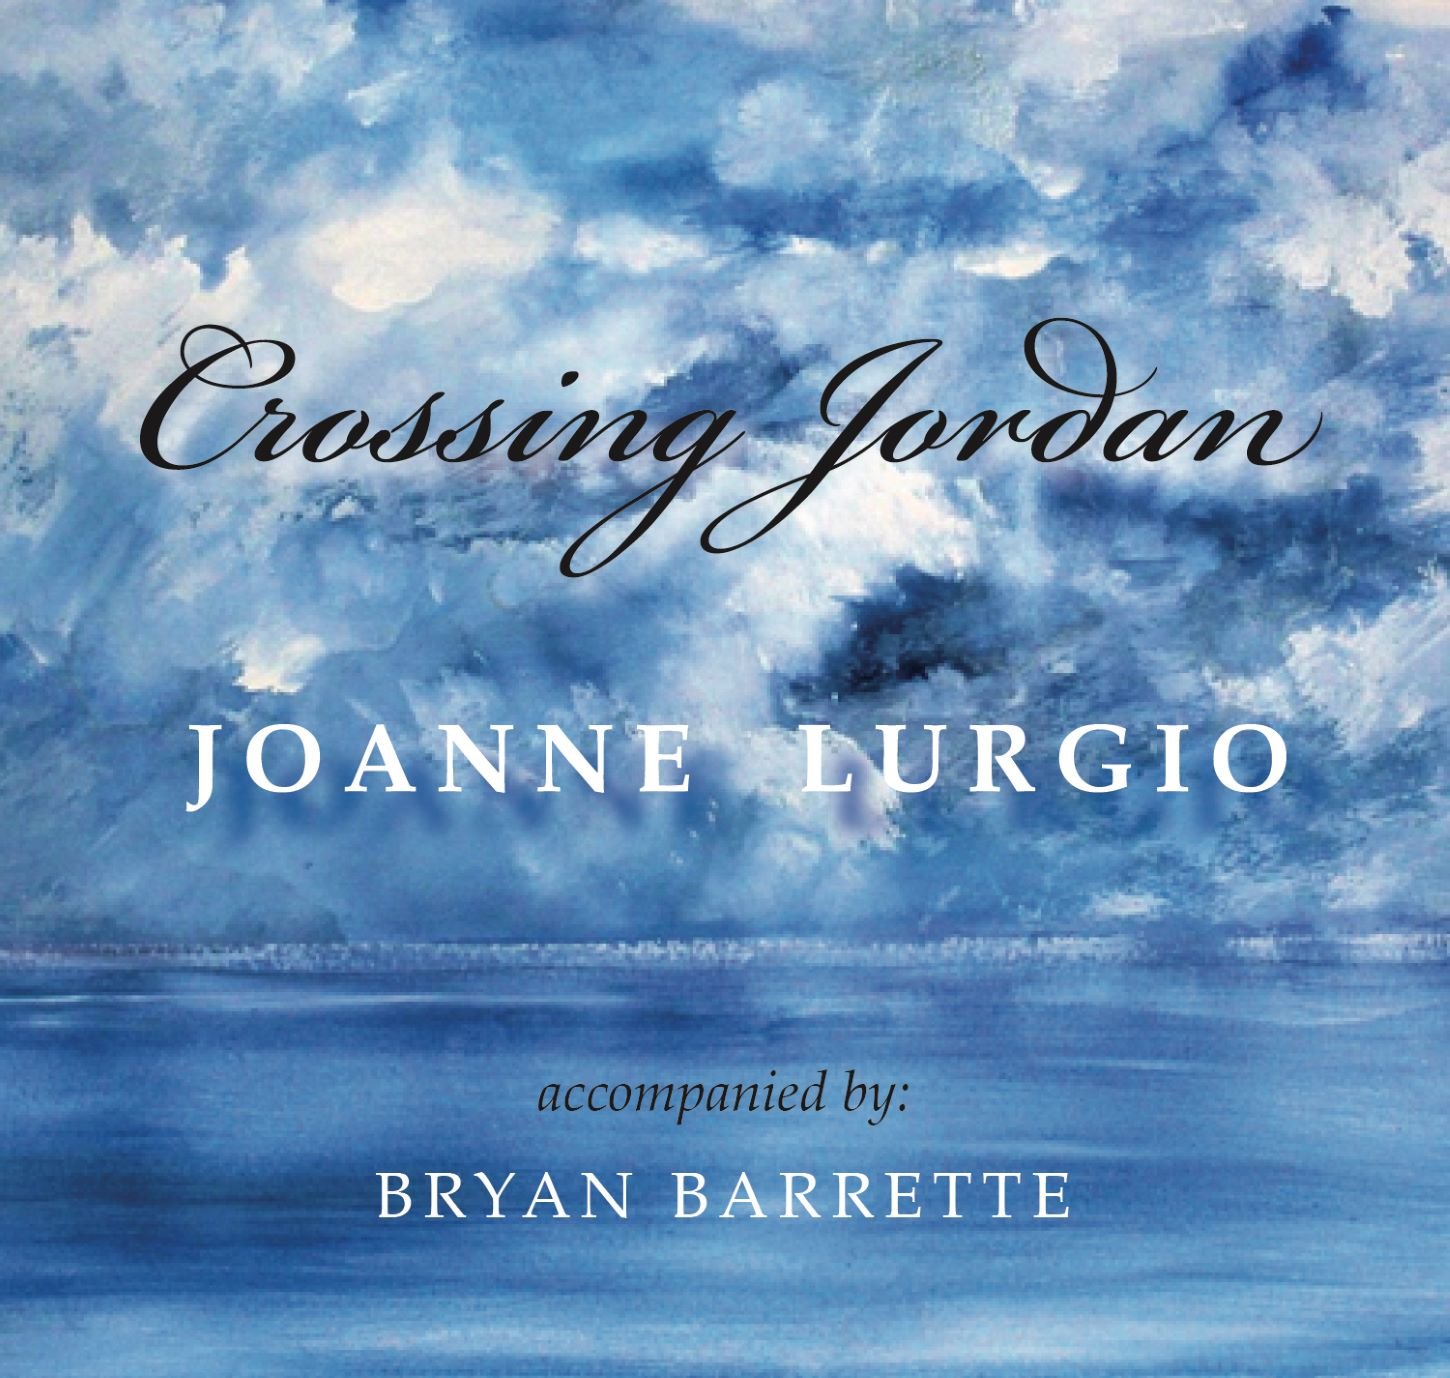 Joanne Lurgio’s official Crossing Jordan CD release celebration will take place on Sunday August 18, 1-3 p.m., at St Kevin Church, 333 Sandy Lane, Warwick and will include a free concert, refreshments and CDs available for purchase.